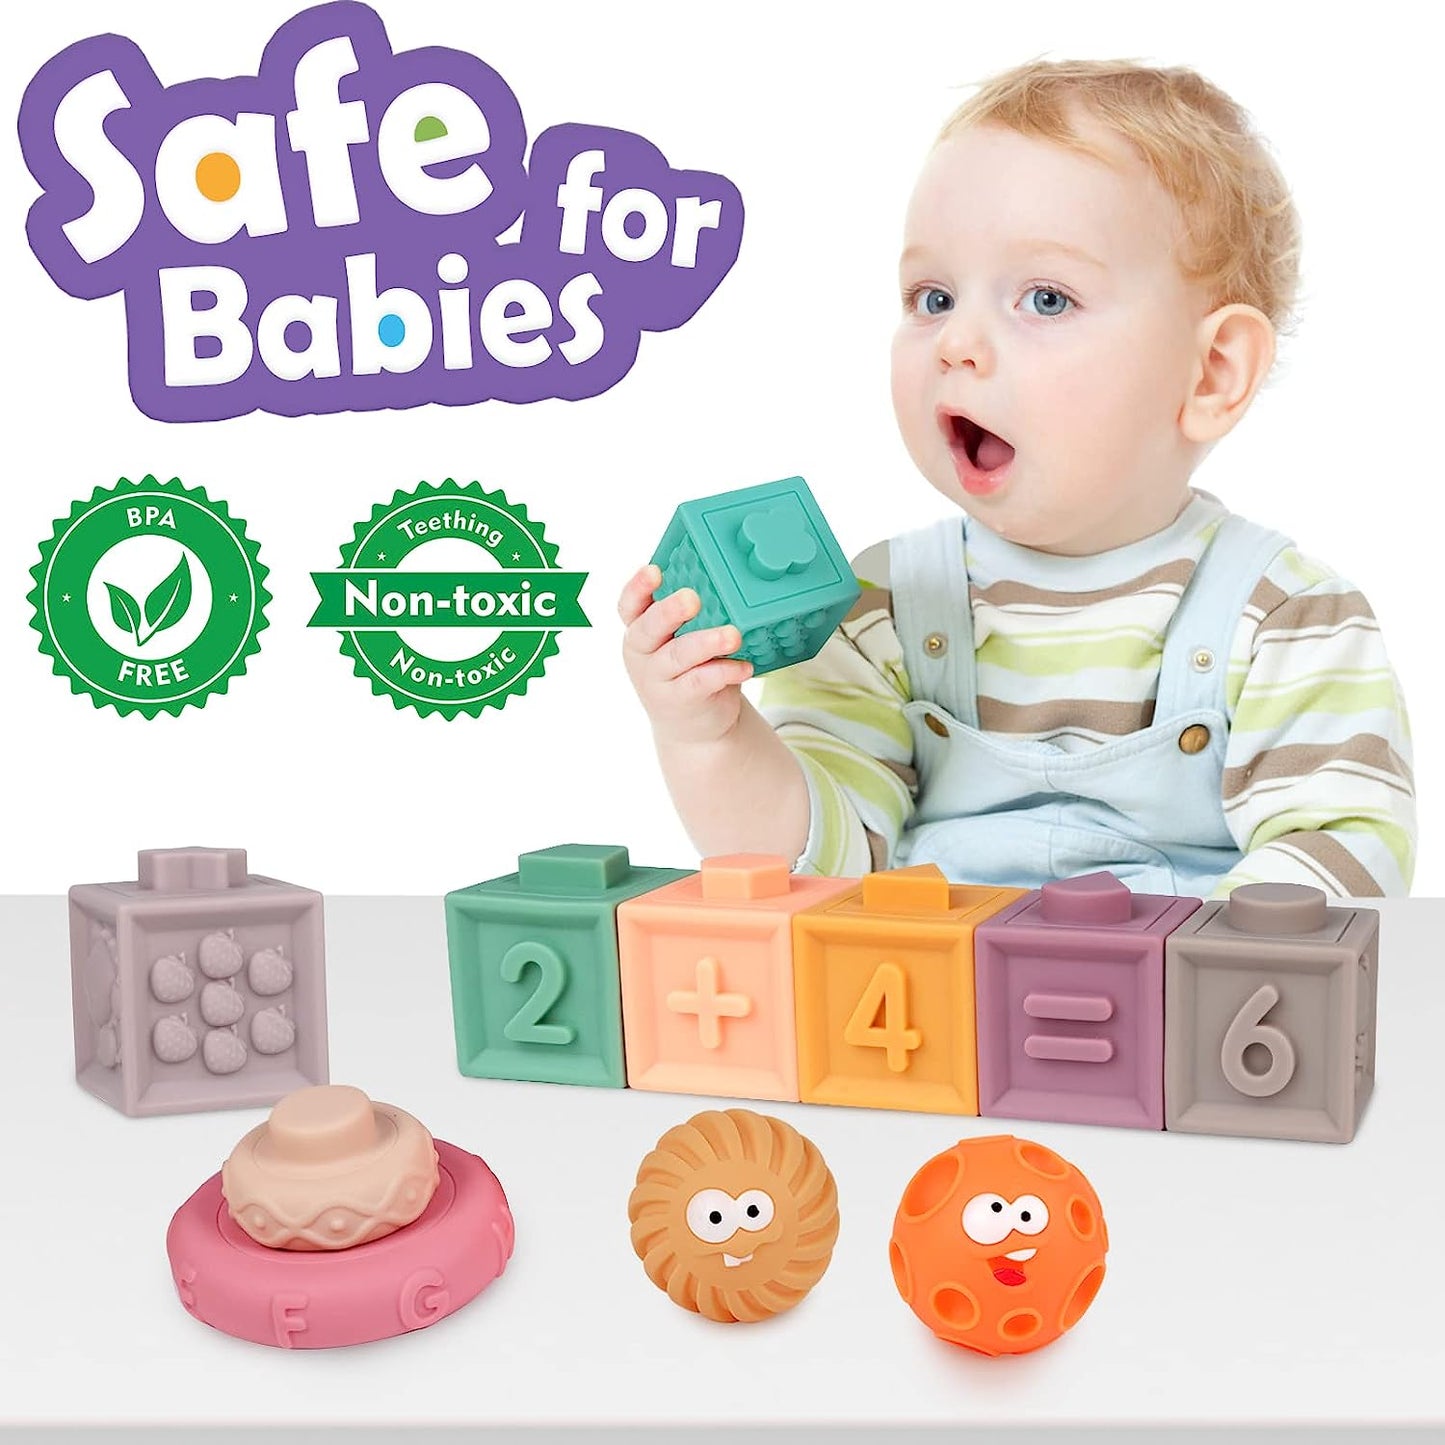 Baby Toys 6 to 12 Months - Toys for Babies 0-6-12-18 Months - Stacking Building Blocks & Sensory Educational Toys & Infant Teething Toys for Toddlers 3 6 9 12 18 Months Boys&Girls